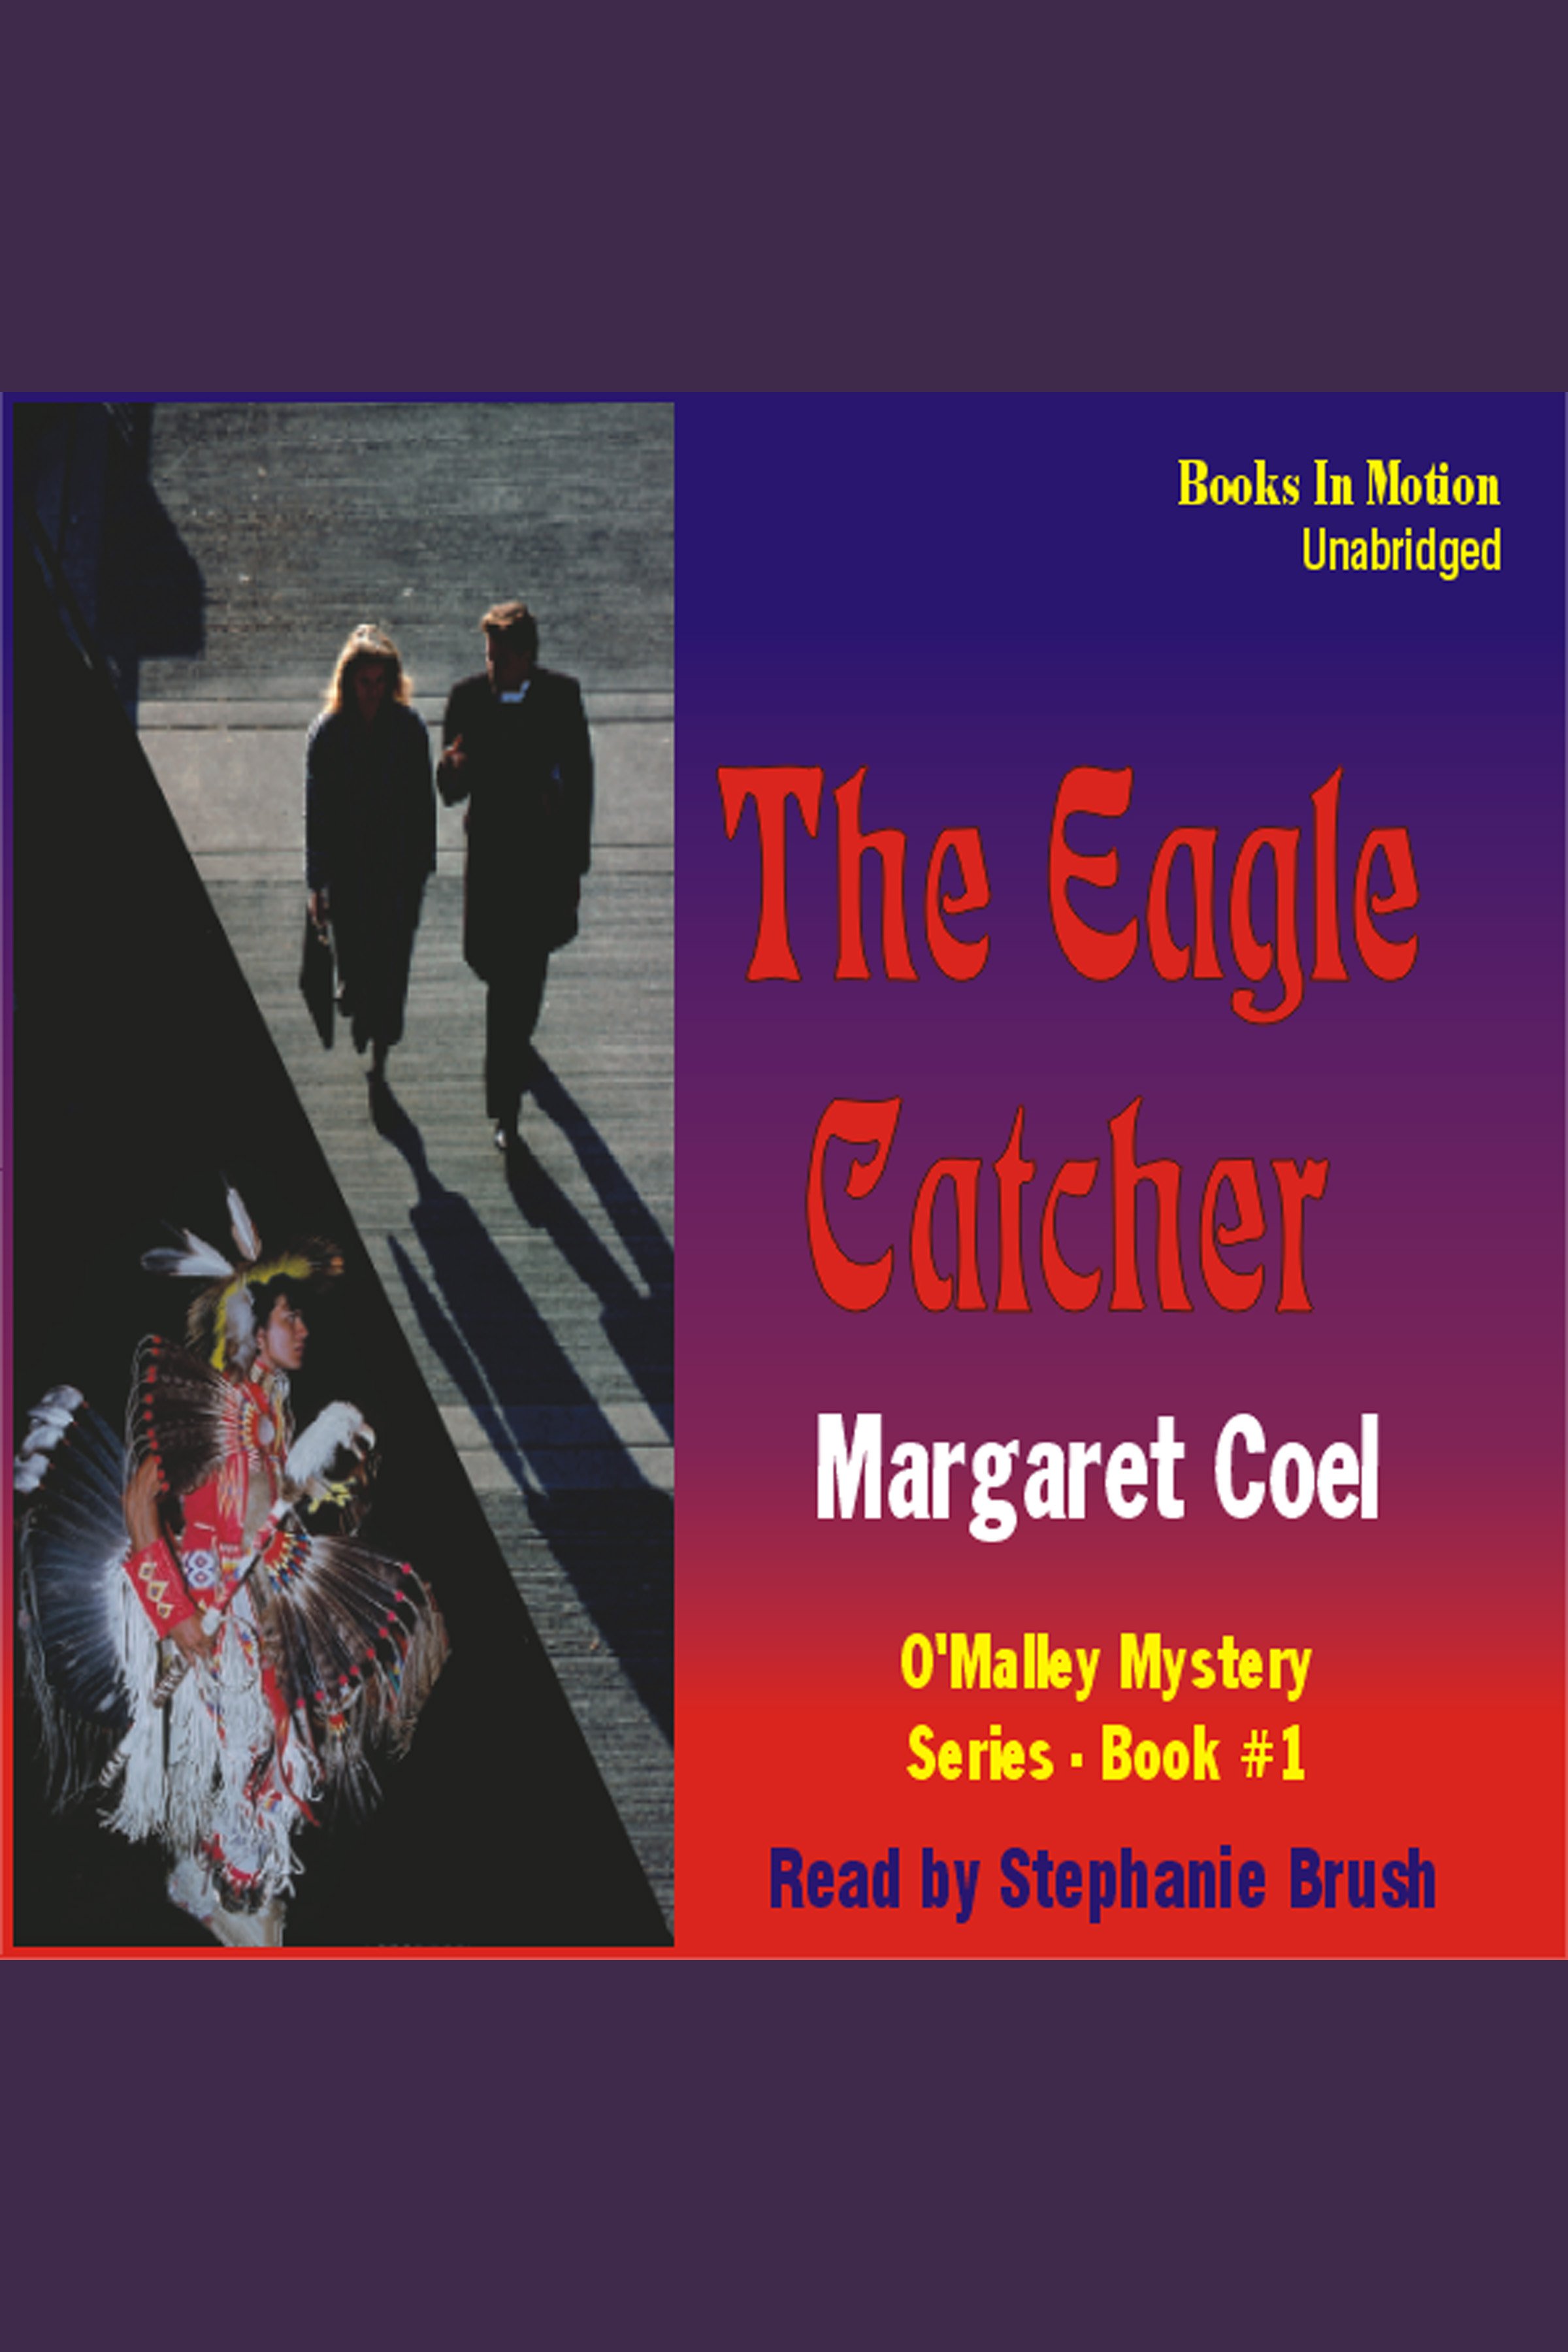 The eagle catcher cover image